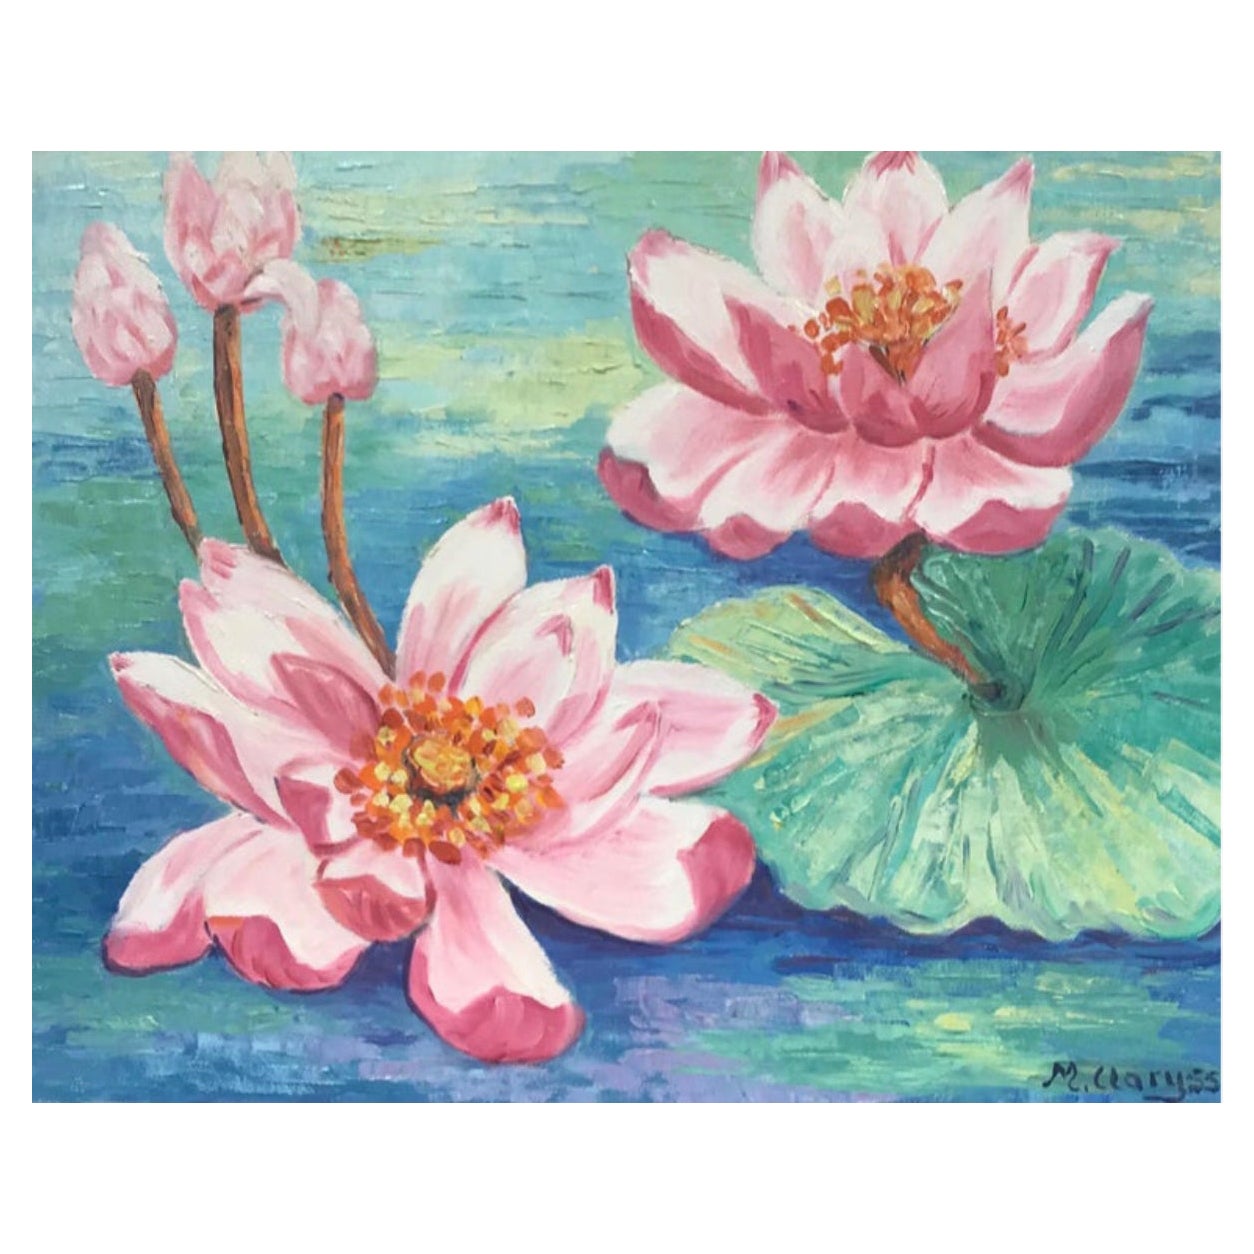 Bright and Colourful Vibrant Pink Lillies on Lily Pad For Sale